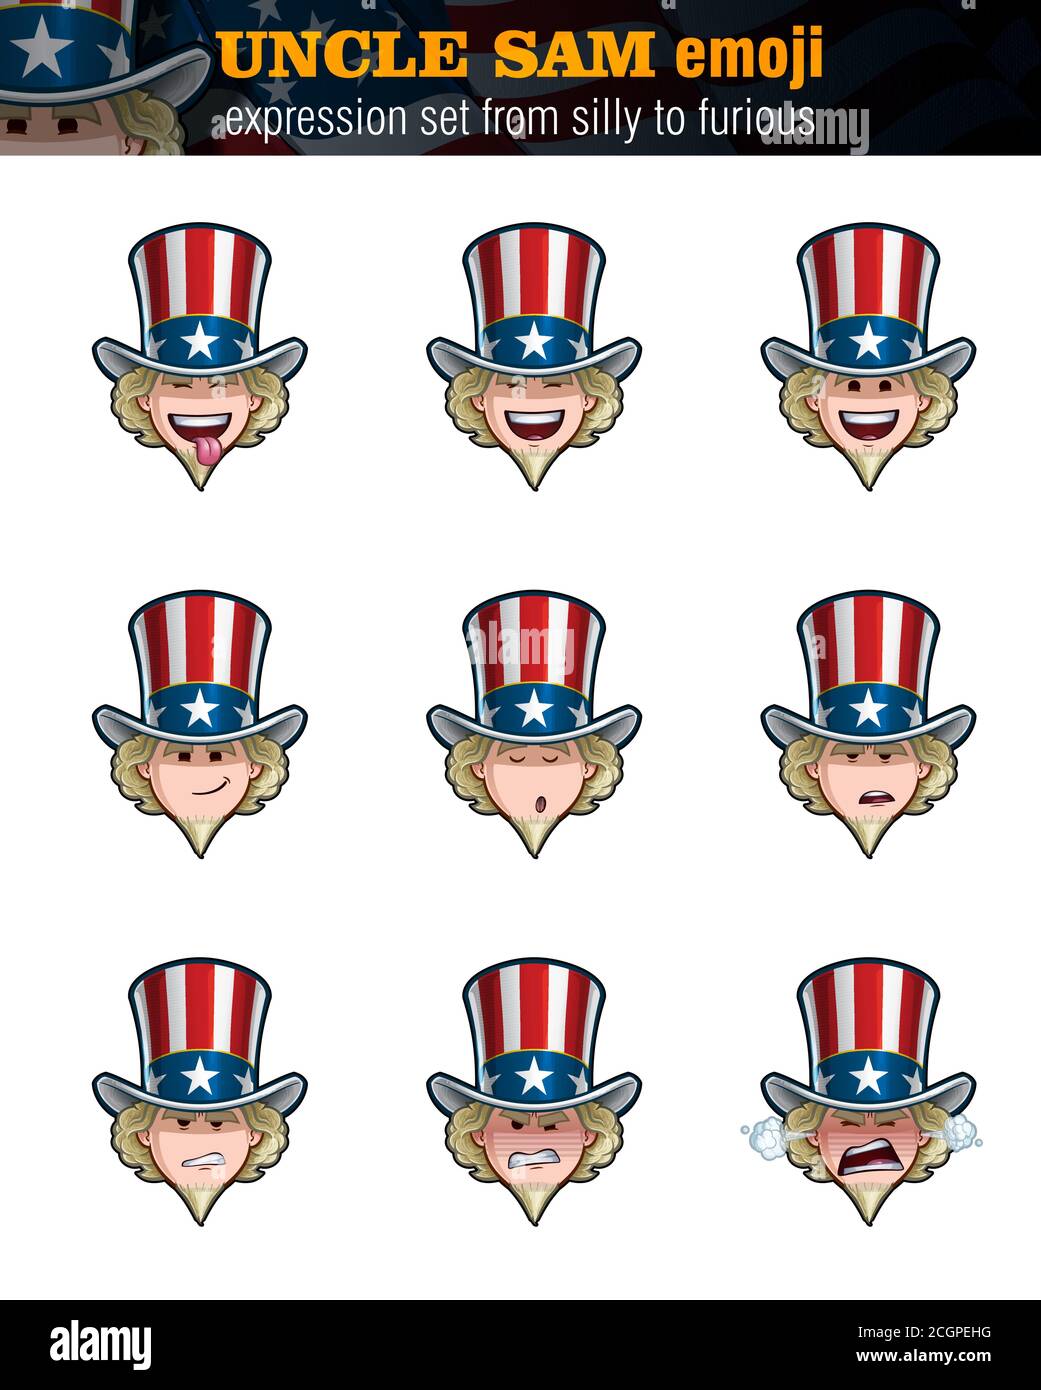 Vector illustrations Set of cartoon Uncle Sam Emoji. Nine expressions, silly, laughing, happy, smiling, preaching, serous, unamused, angry n furious. Stock Vector